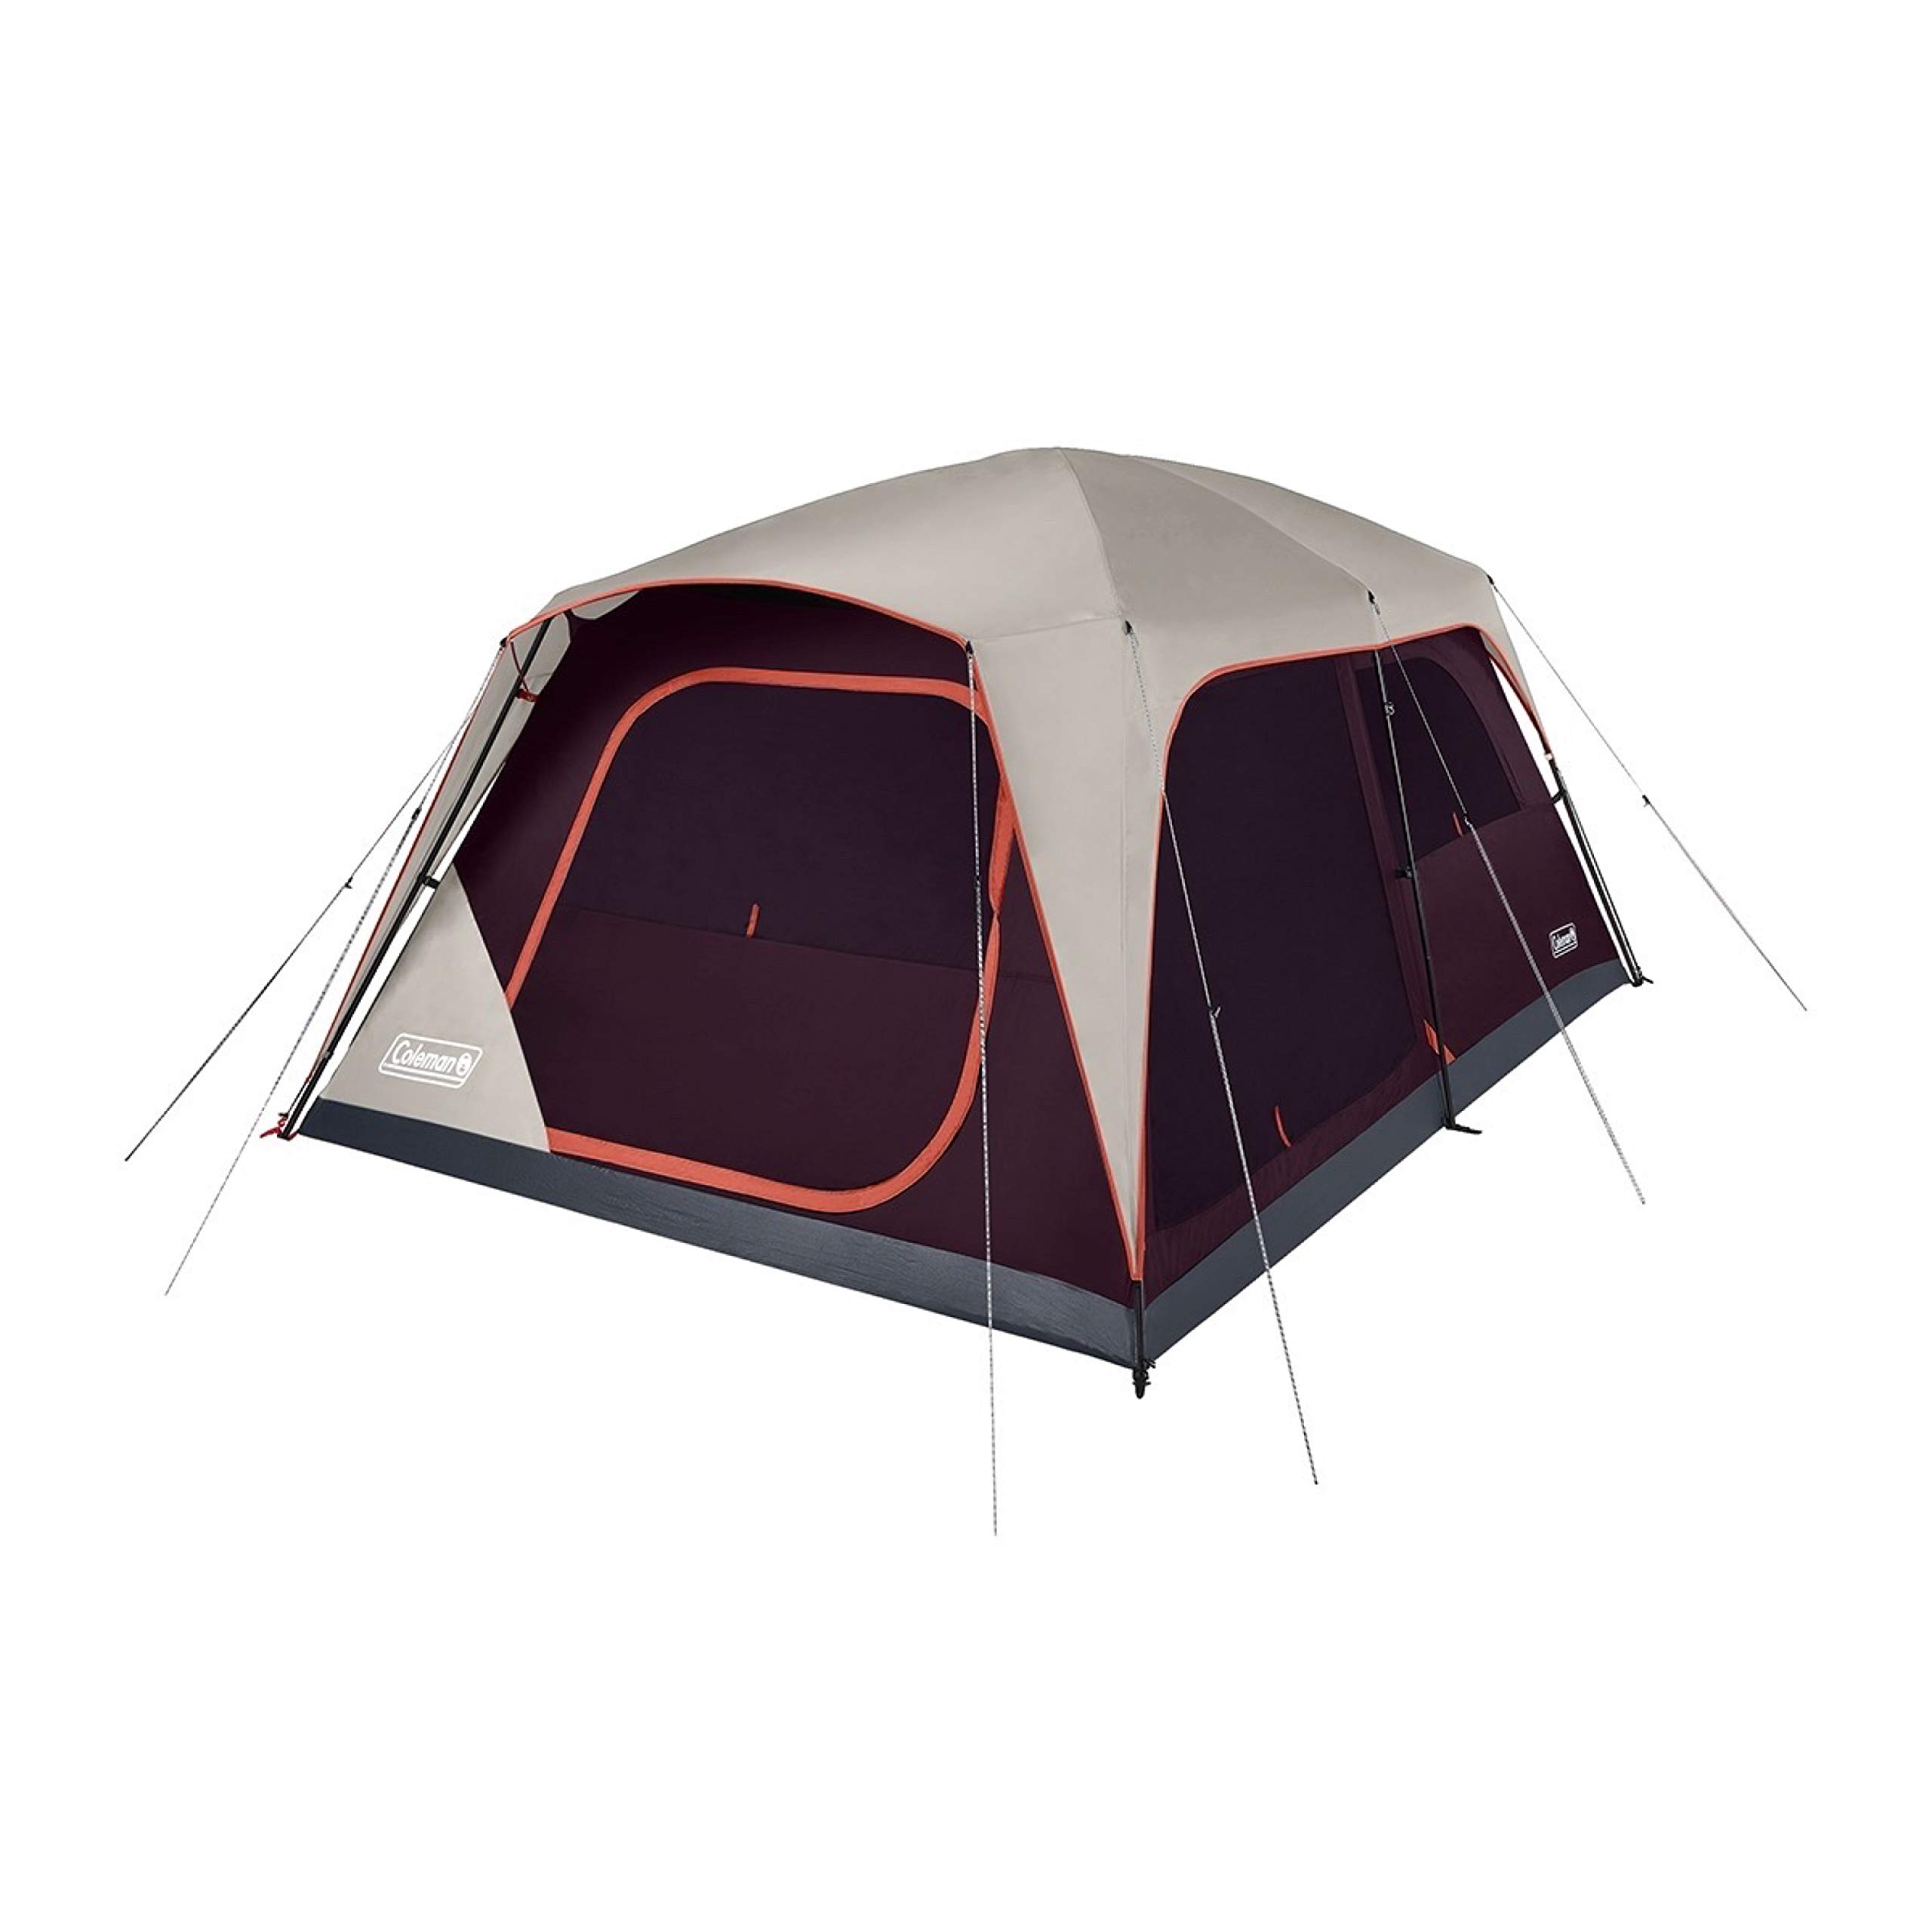 10-Person 14' x 10' Coleman Skylodge 3-Season Camping Tent w/ Room Divider, Mesh Storage Pockets, & Rainfly (Blackberry) $187 + Free Shipping